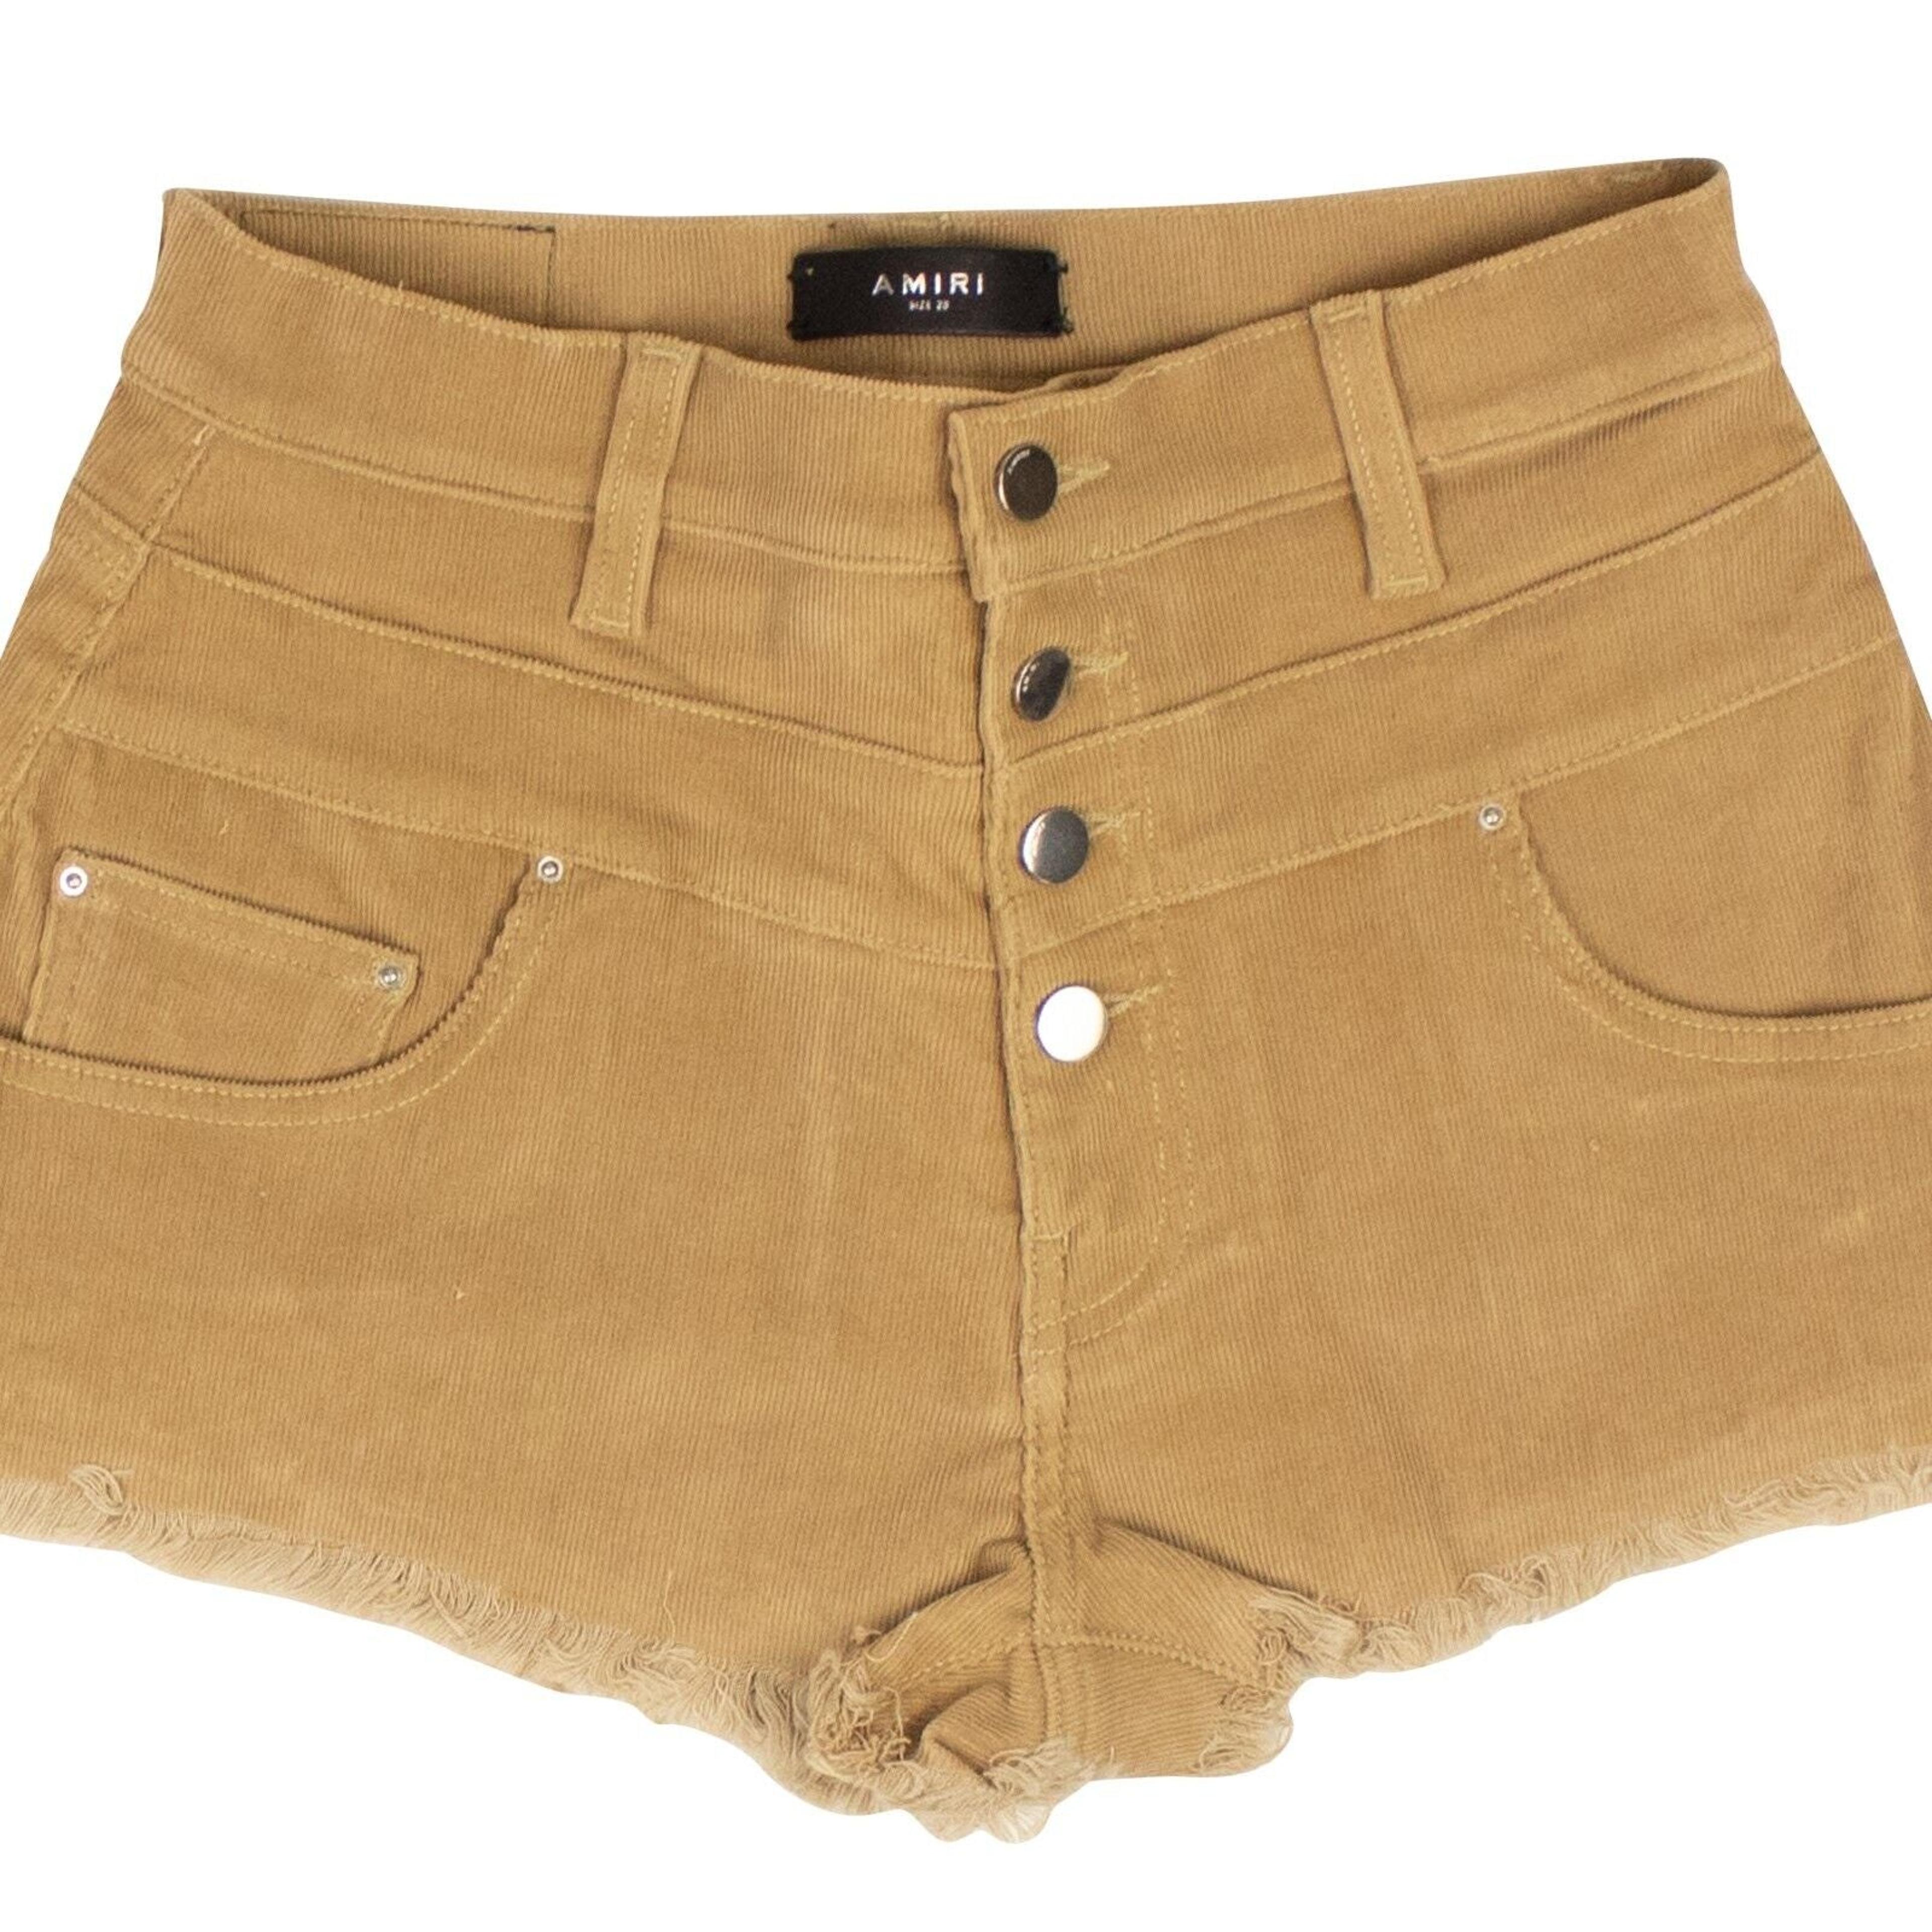 Alternate View 1 of Brown Corduroy High Waisted Shorts